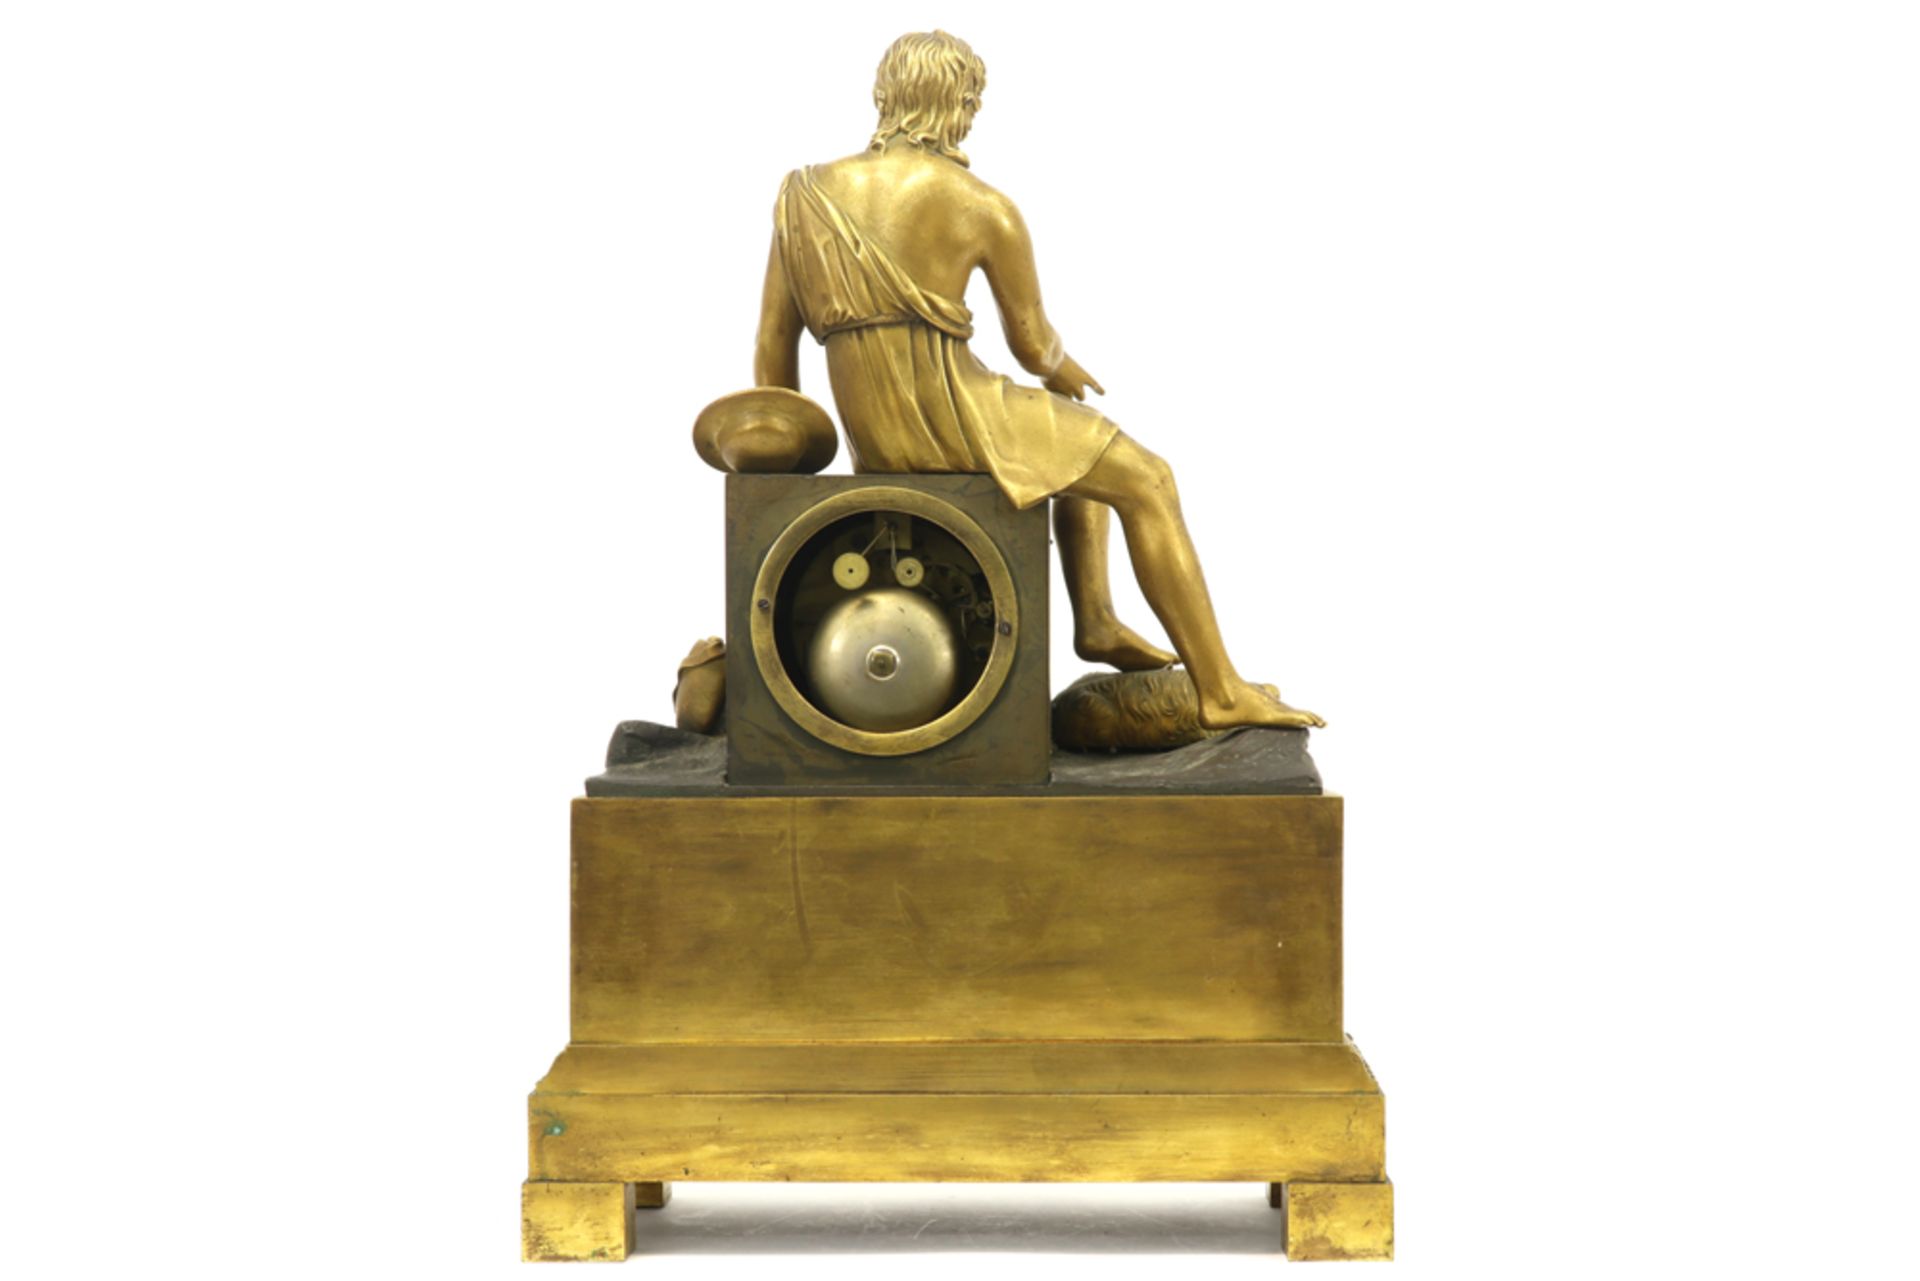 early 19th Cent. French clock in partially gilded bronze with a "Young man with dog" sculpture and a - Image 3 of 4